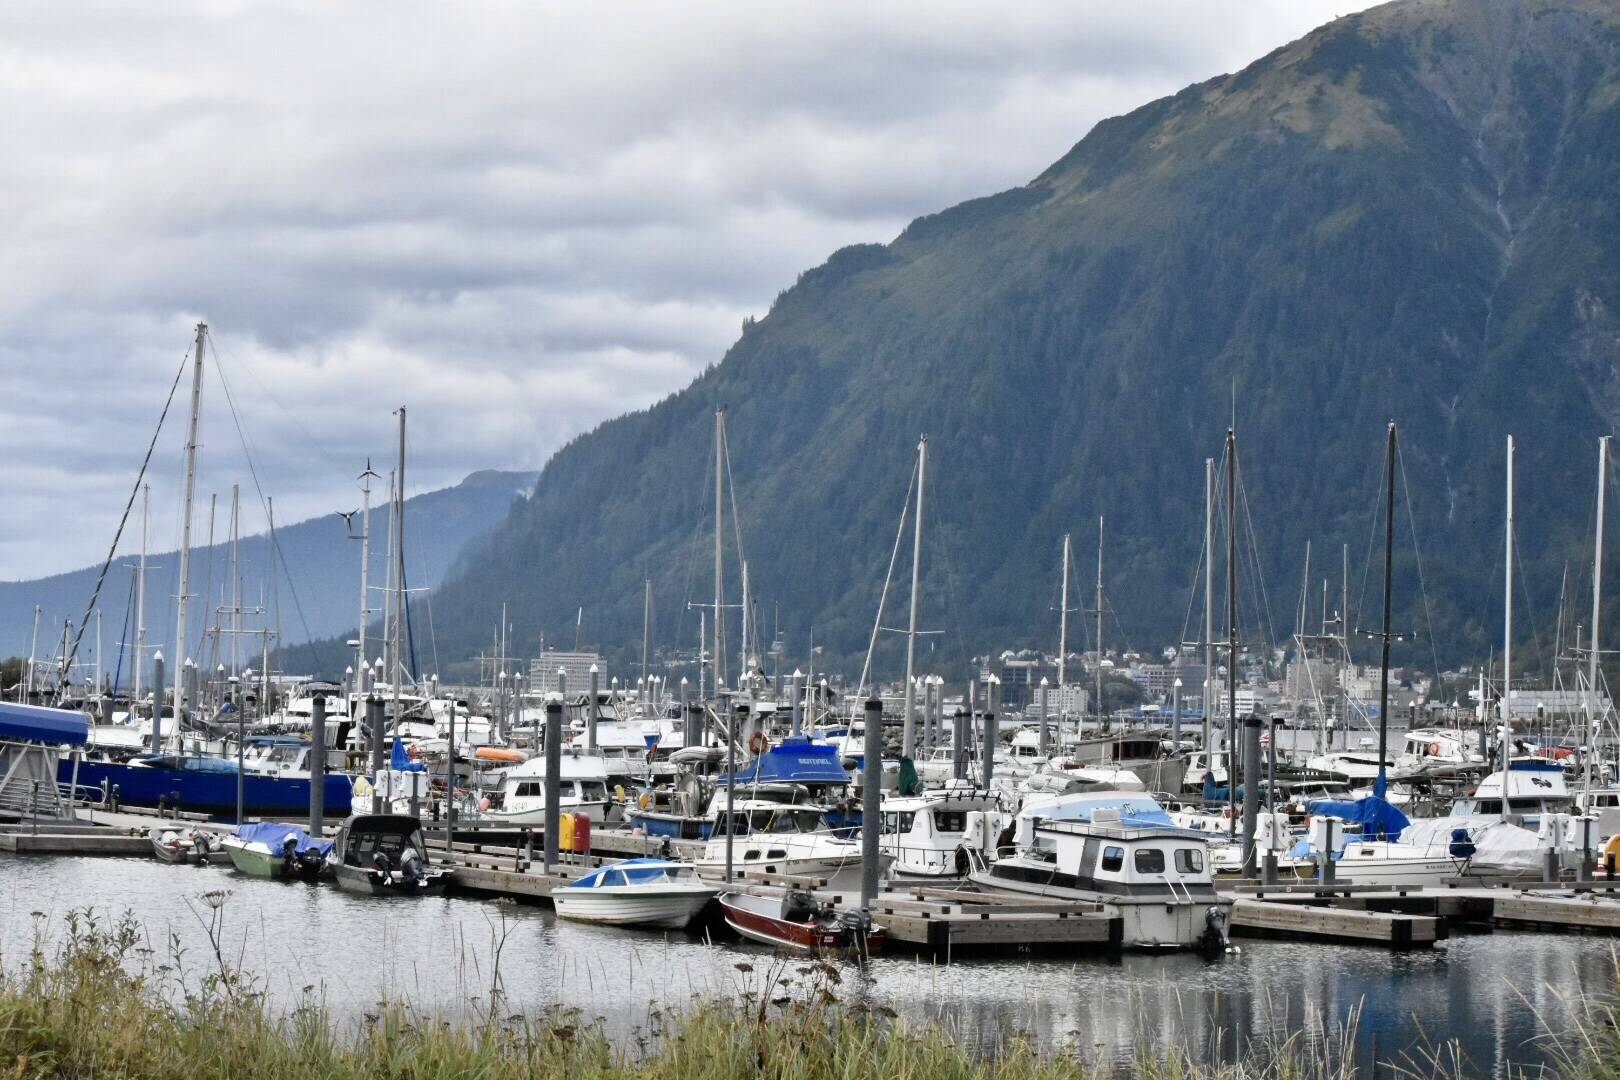 Juneau Docks and Harbors has issued a warning to boat owners to make sure their vessels are made fast and pumps functional as a large weather system is due to hit Juneau on Friday, Sept. 10, 2021. (Peter Segall / Juneau Empire)